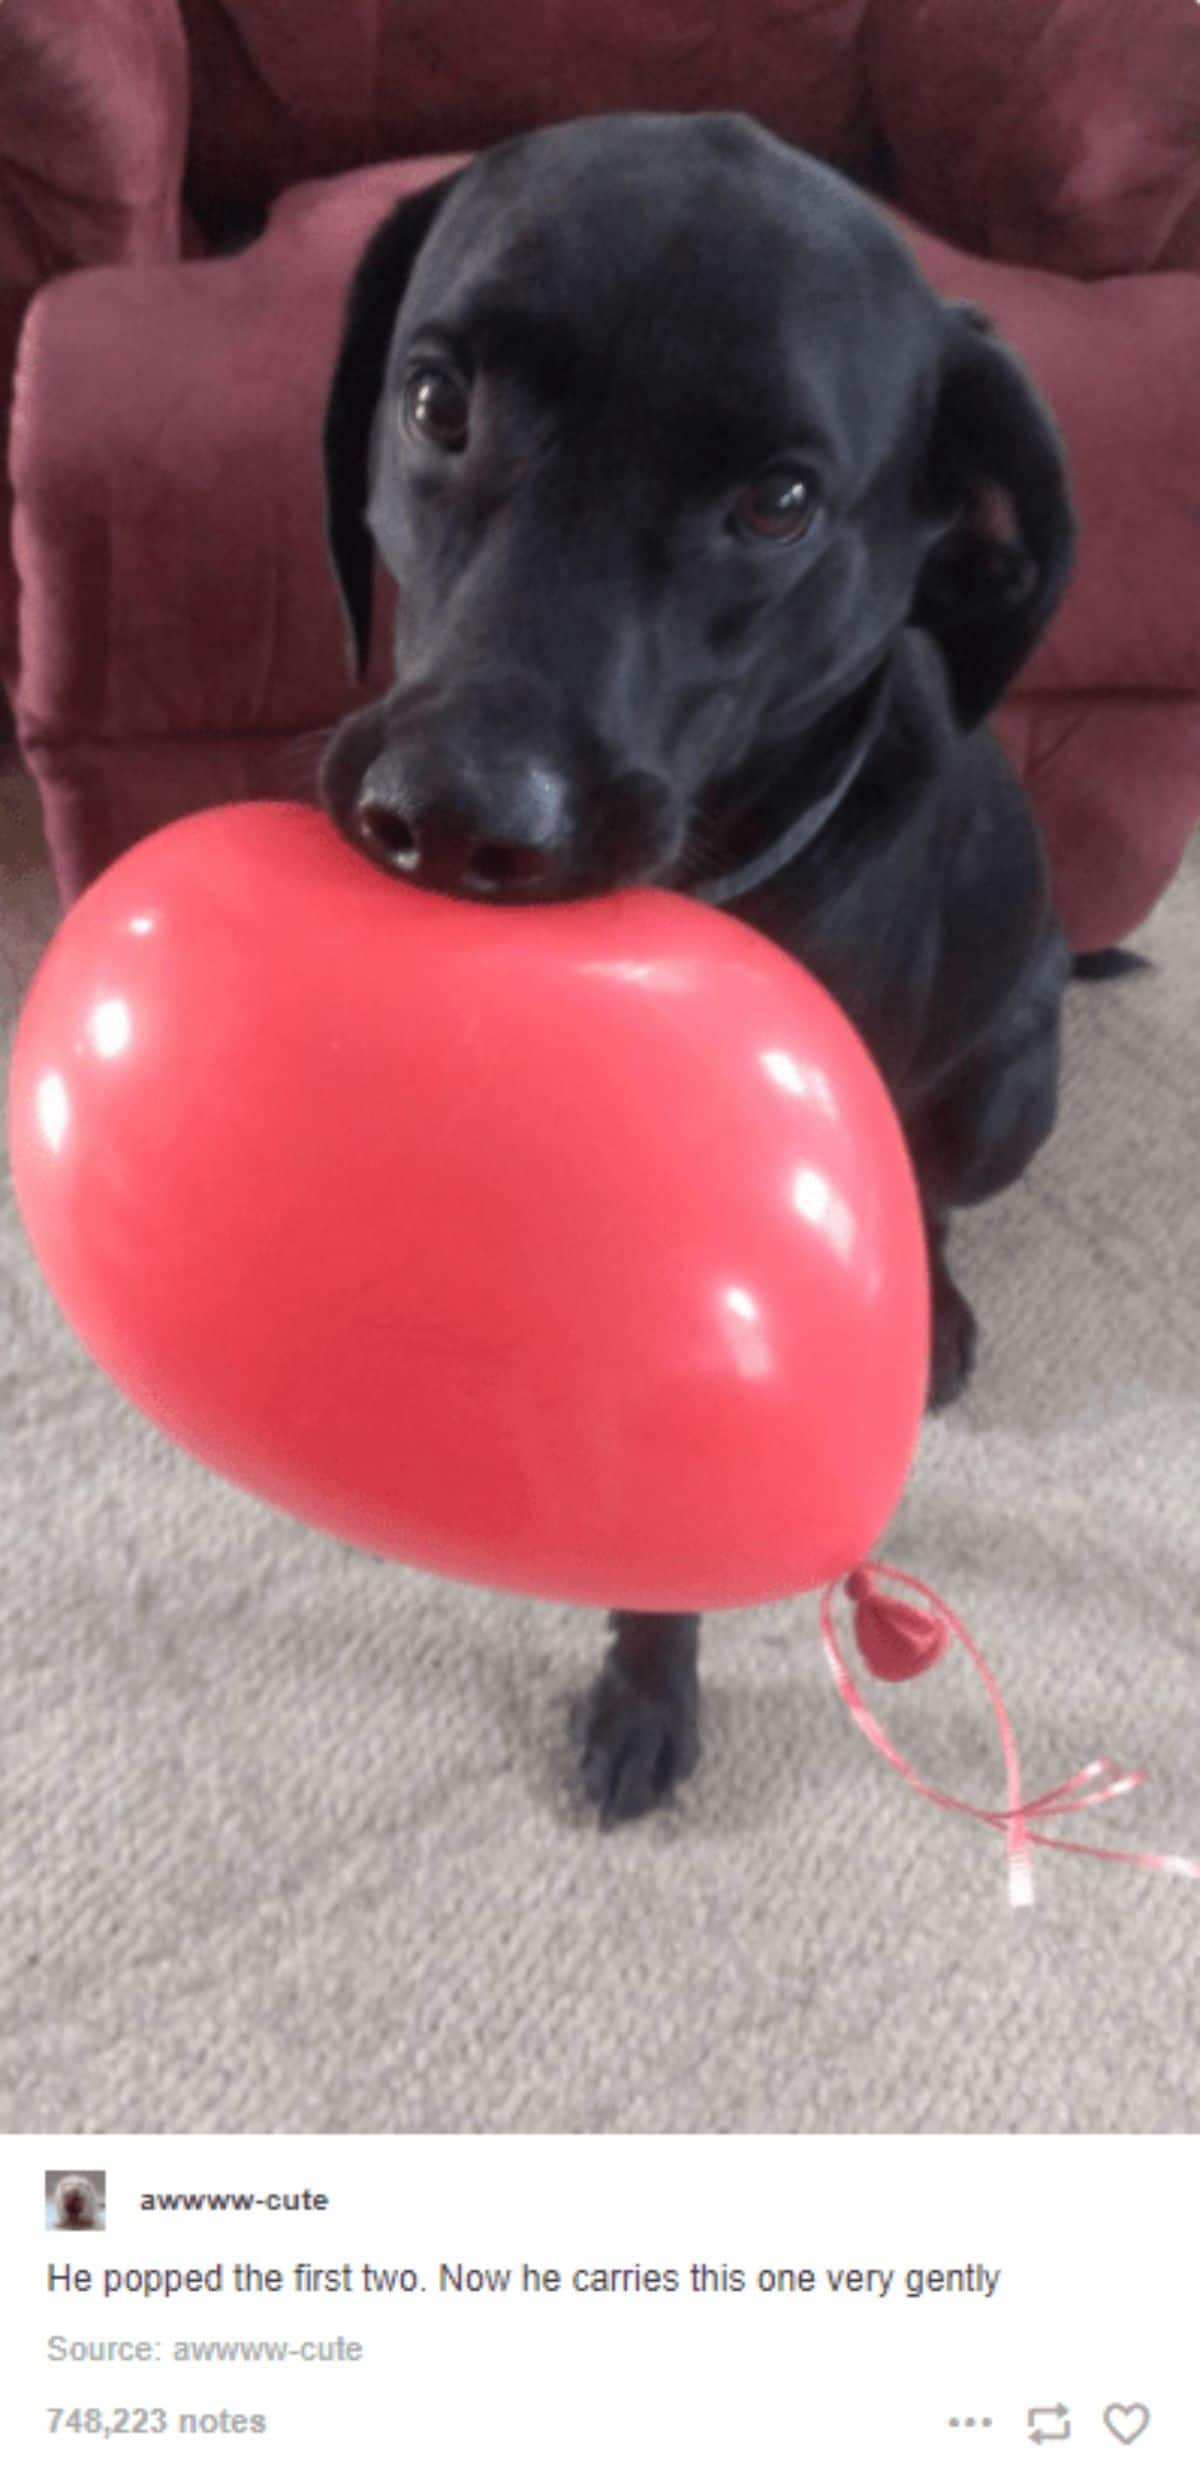 tumblr post of black labrador retriever holding a red balloon with caption saying he popped the first 2 and carries this one very gently